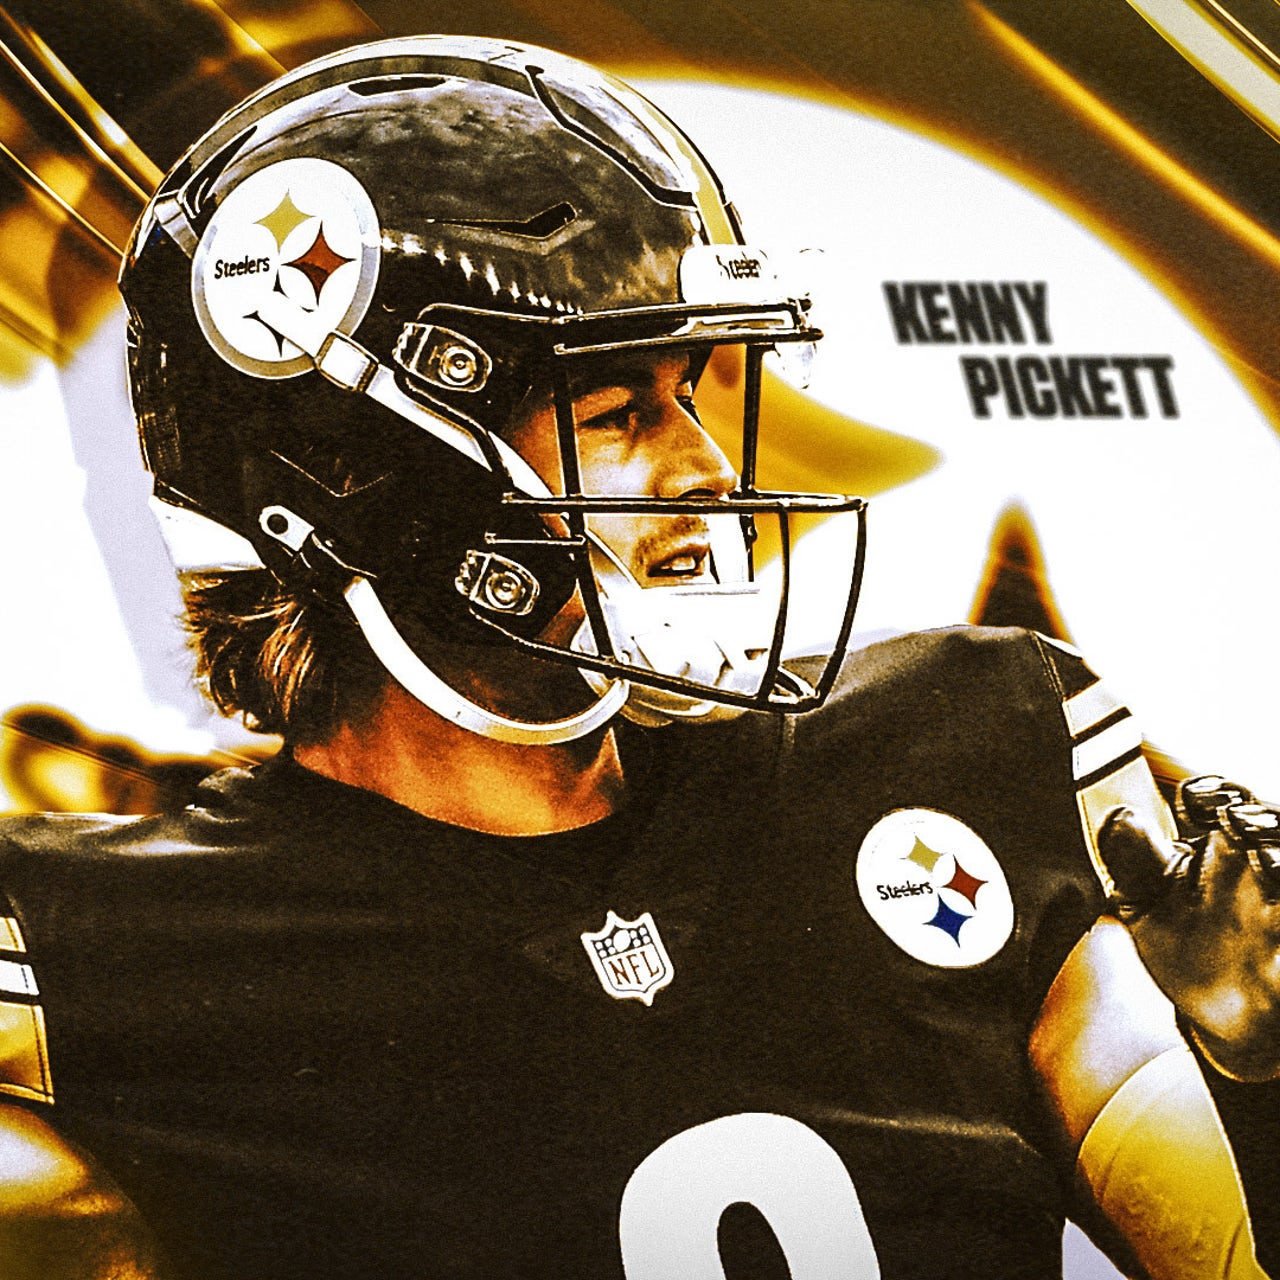 Kenny Pickett Wallpaper  iXpap  Pittsburgh steelers football Pittsburgh  steelers clothes Pittsburgh steelers players